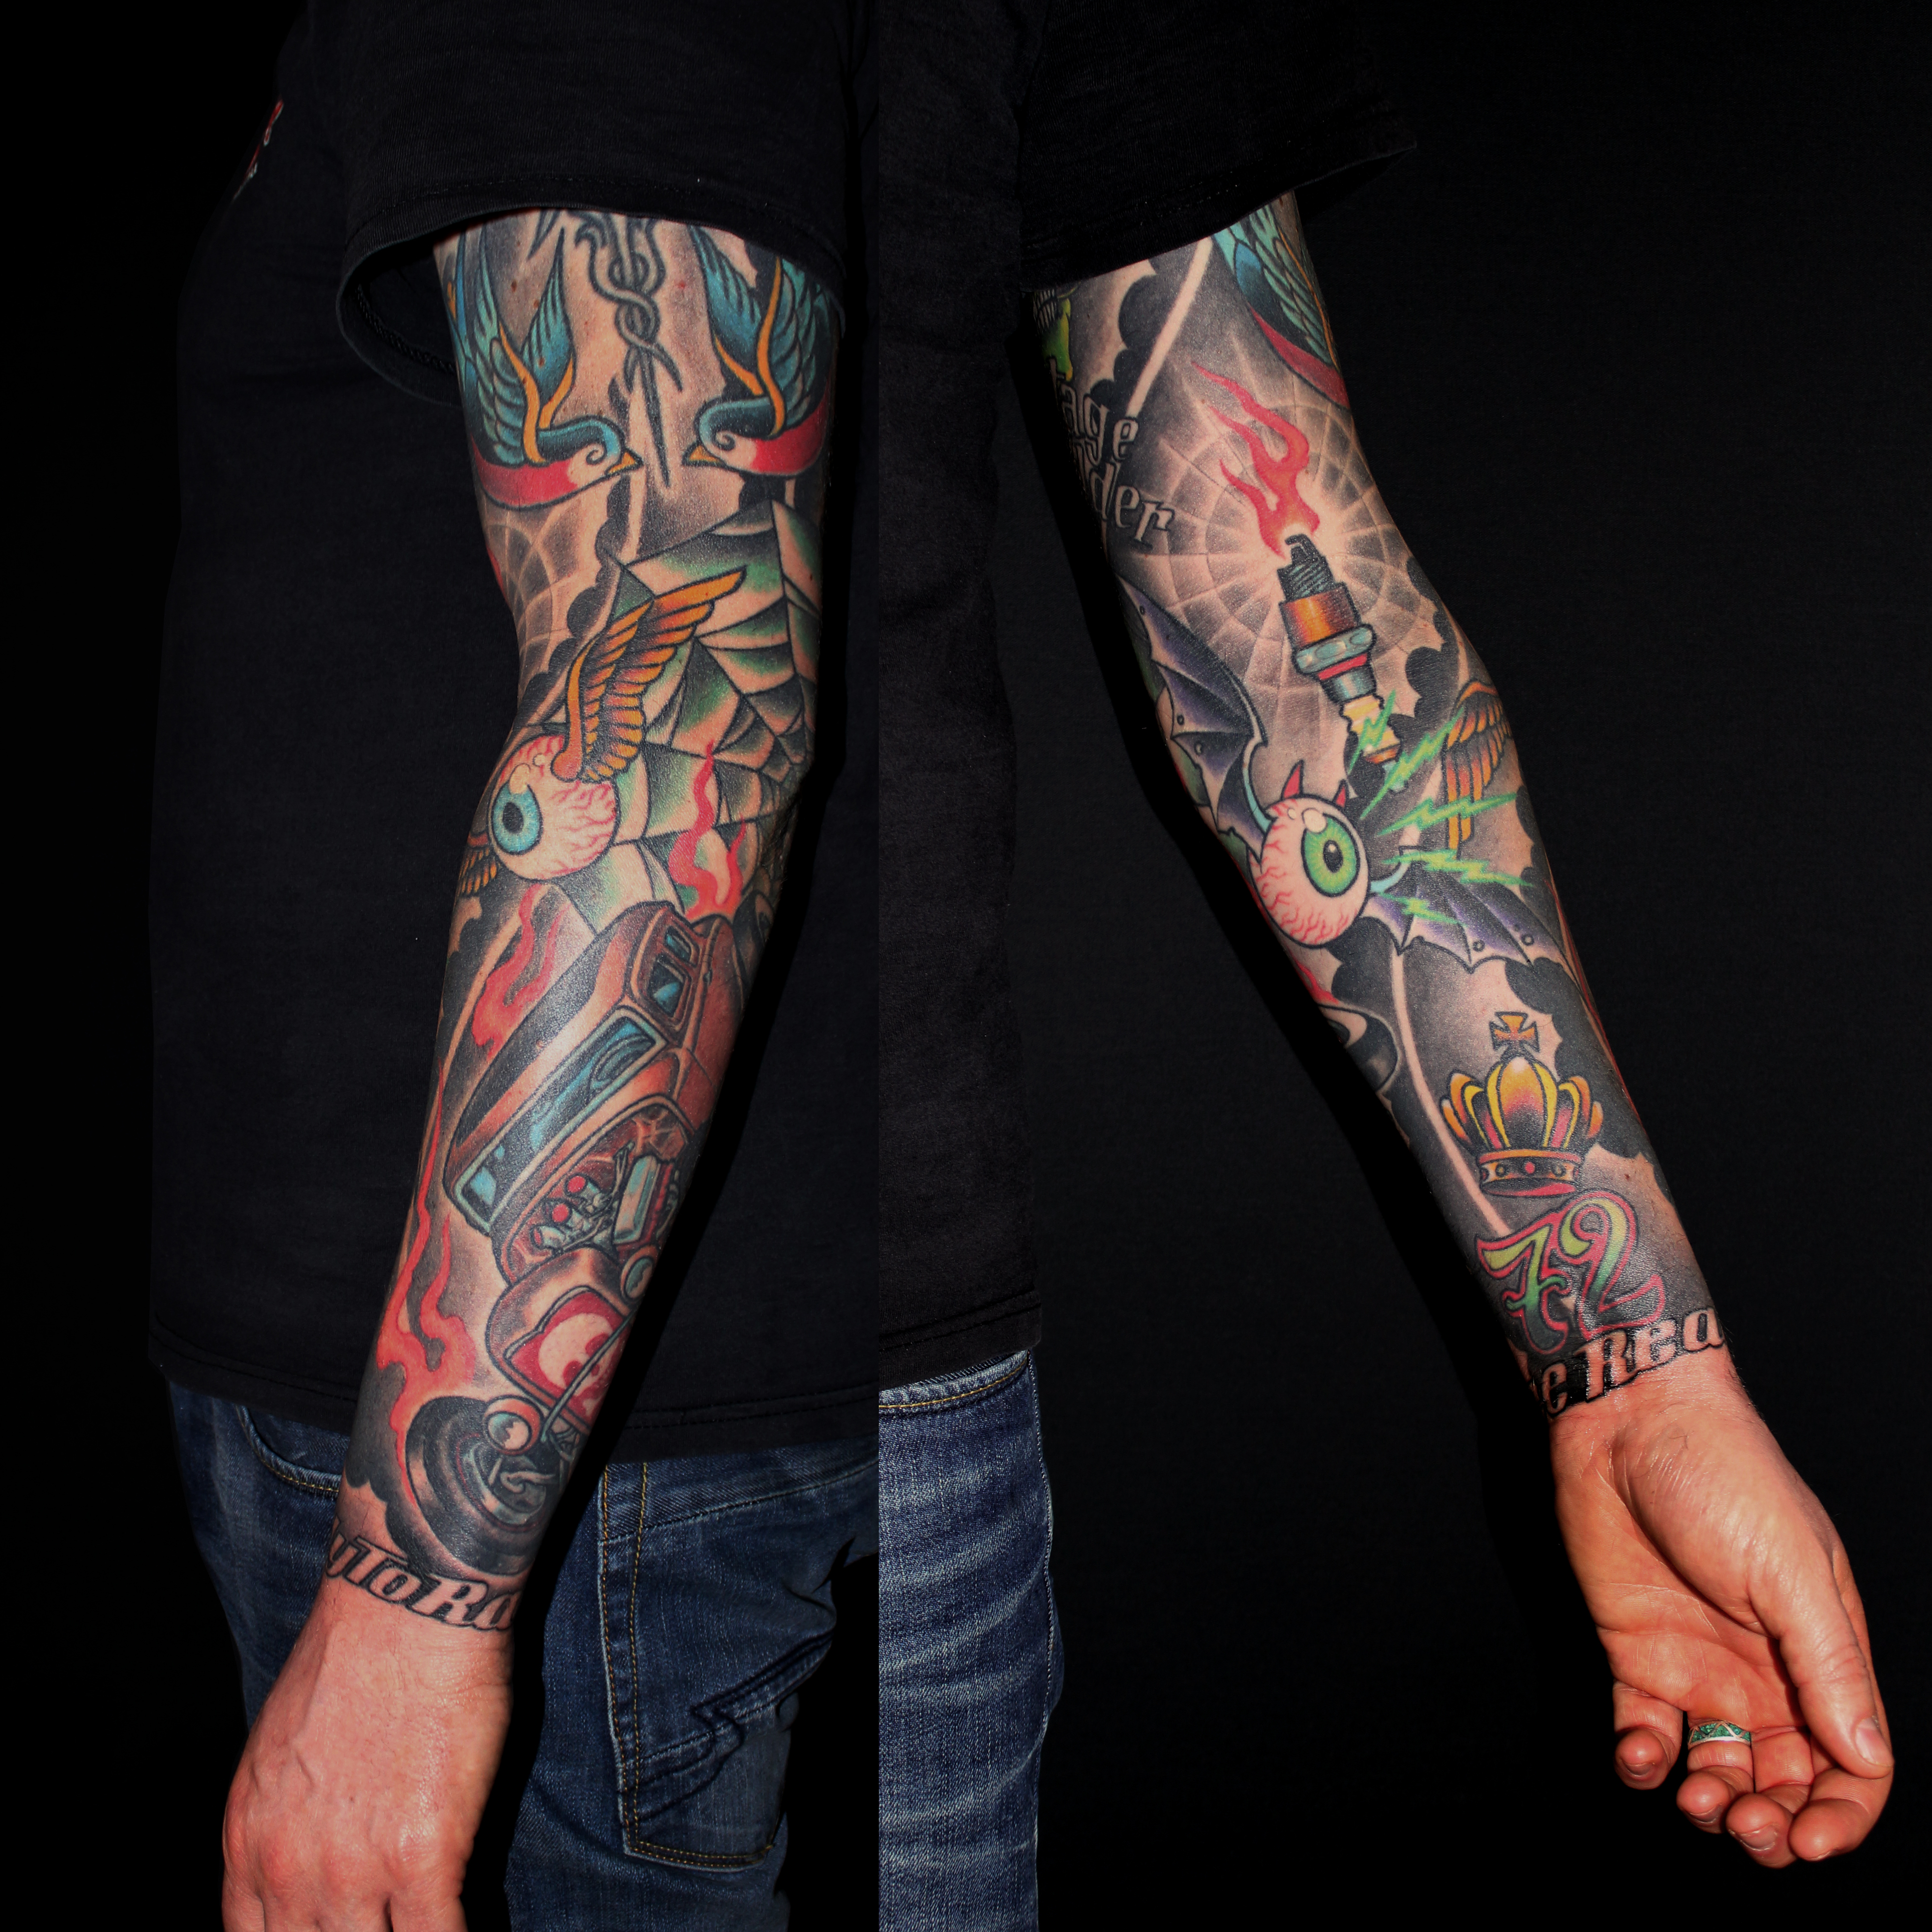 Tattoos by Maik Linder